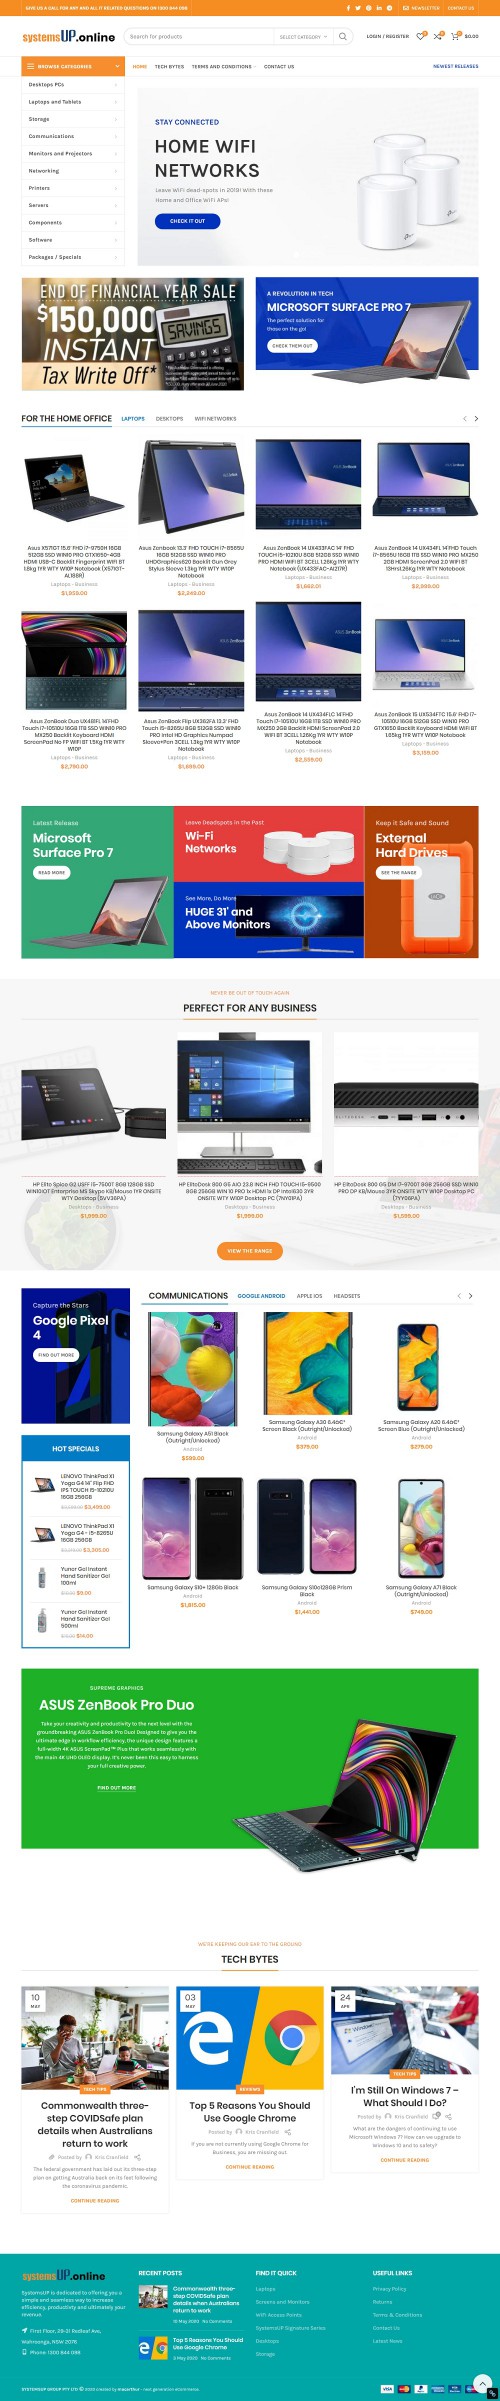 We are one of the best Computer store in Australia. We sell online computer parts, Laptop, Personal Computer and computer accessories in Australia. Call us 1300 844 098. 

SystemsUP is dedicated to offering you a simple and seamless way to increase efficiency, productivty and ultimately your revenue.

Web:- https://systemsup.online/